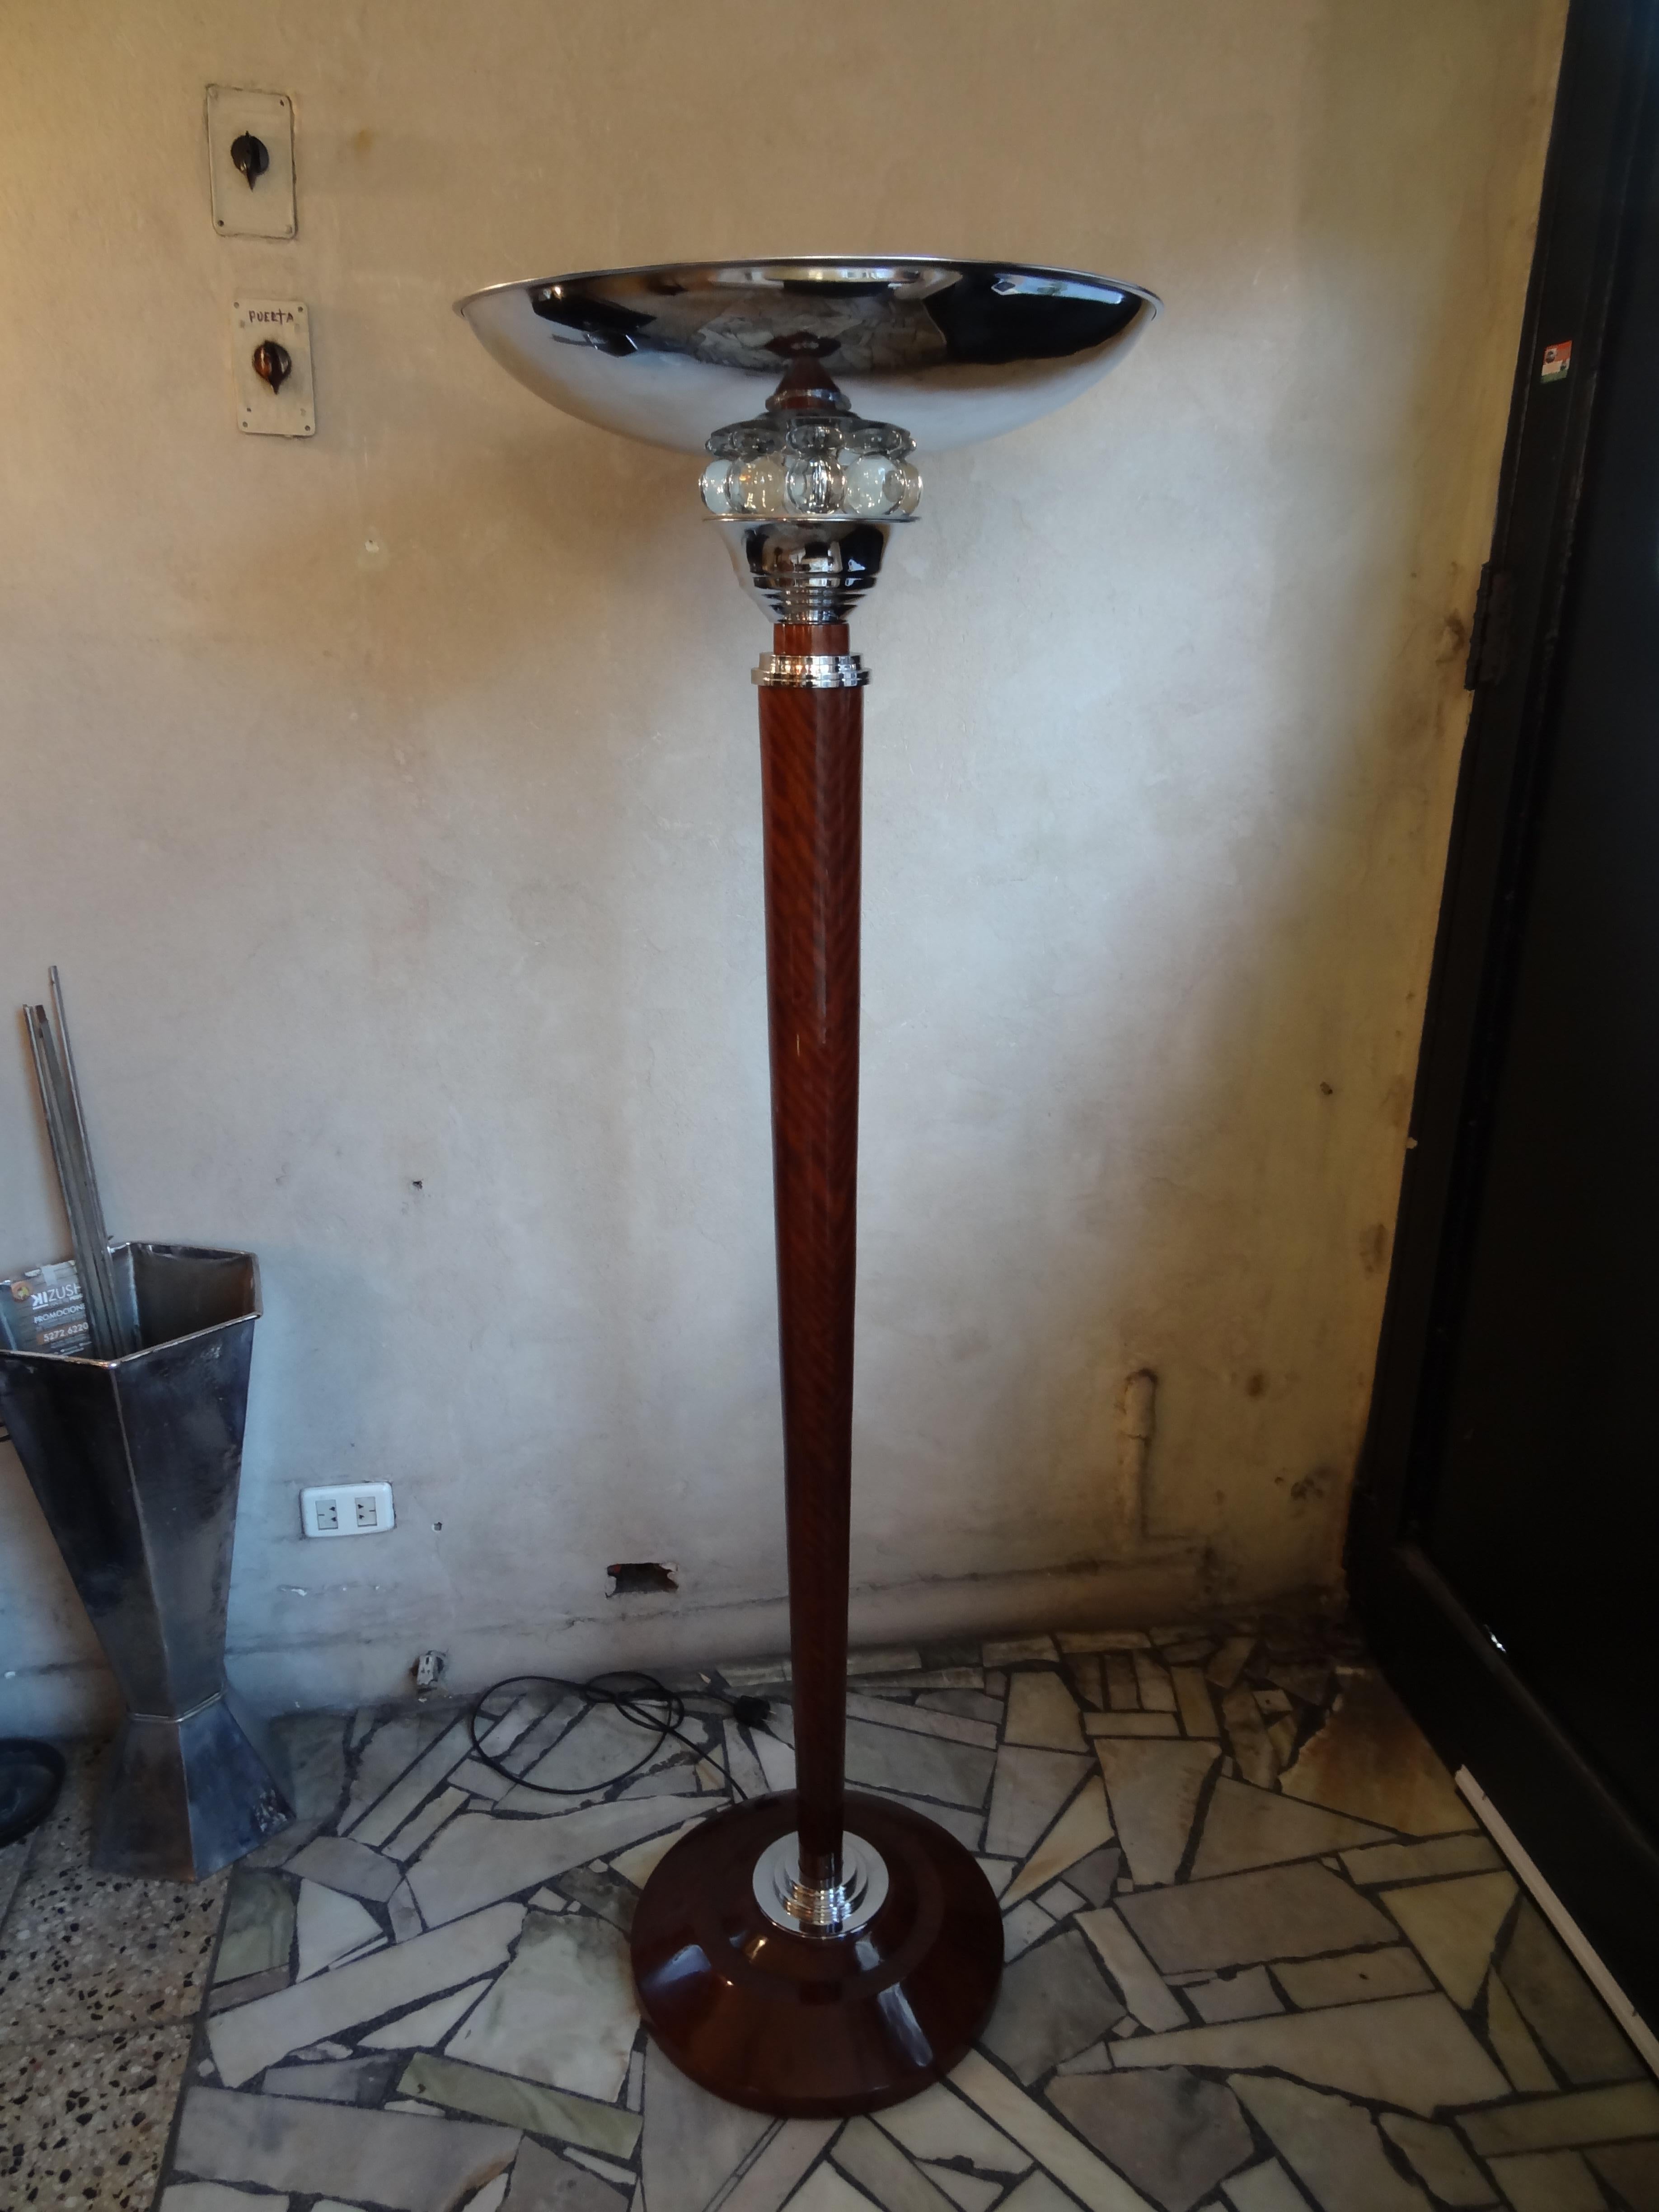 2 floor lamps Art Deco

Materials: wood, glass, chrome
France
You want to live in the golden years, those are the floor lamps that your project needs.
We have specialized in the sale of Art Deco and Art Nouveau styles since 1982. 
Pushing the